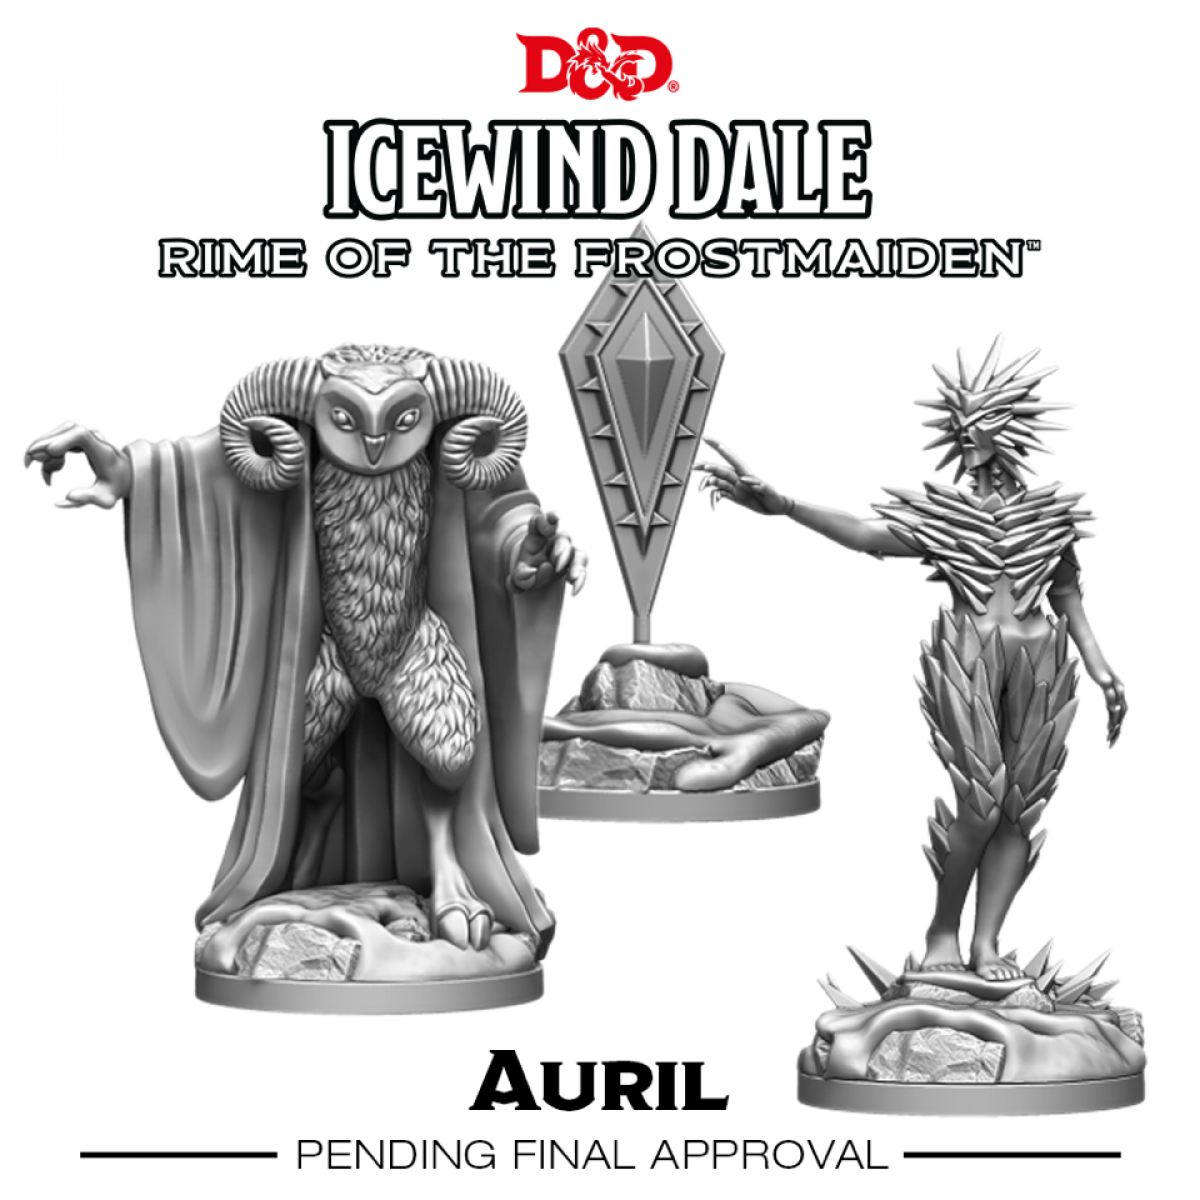 Dungeons &amp; Dragons - Icewind Dale Rime of the Frostmaiden Auril (3 Figs)